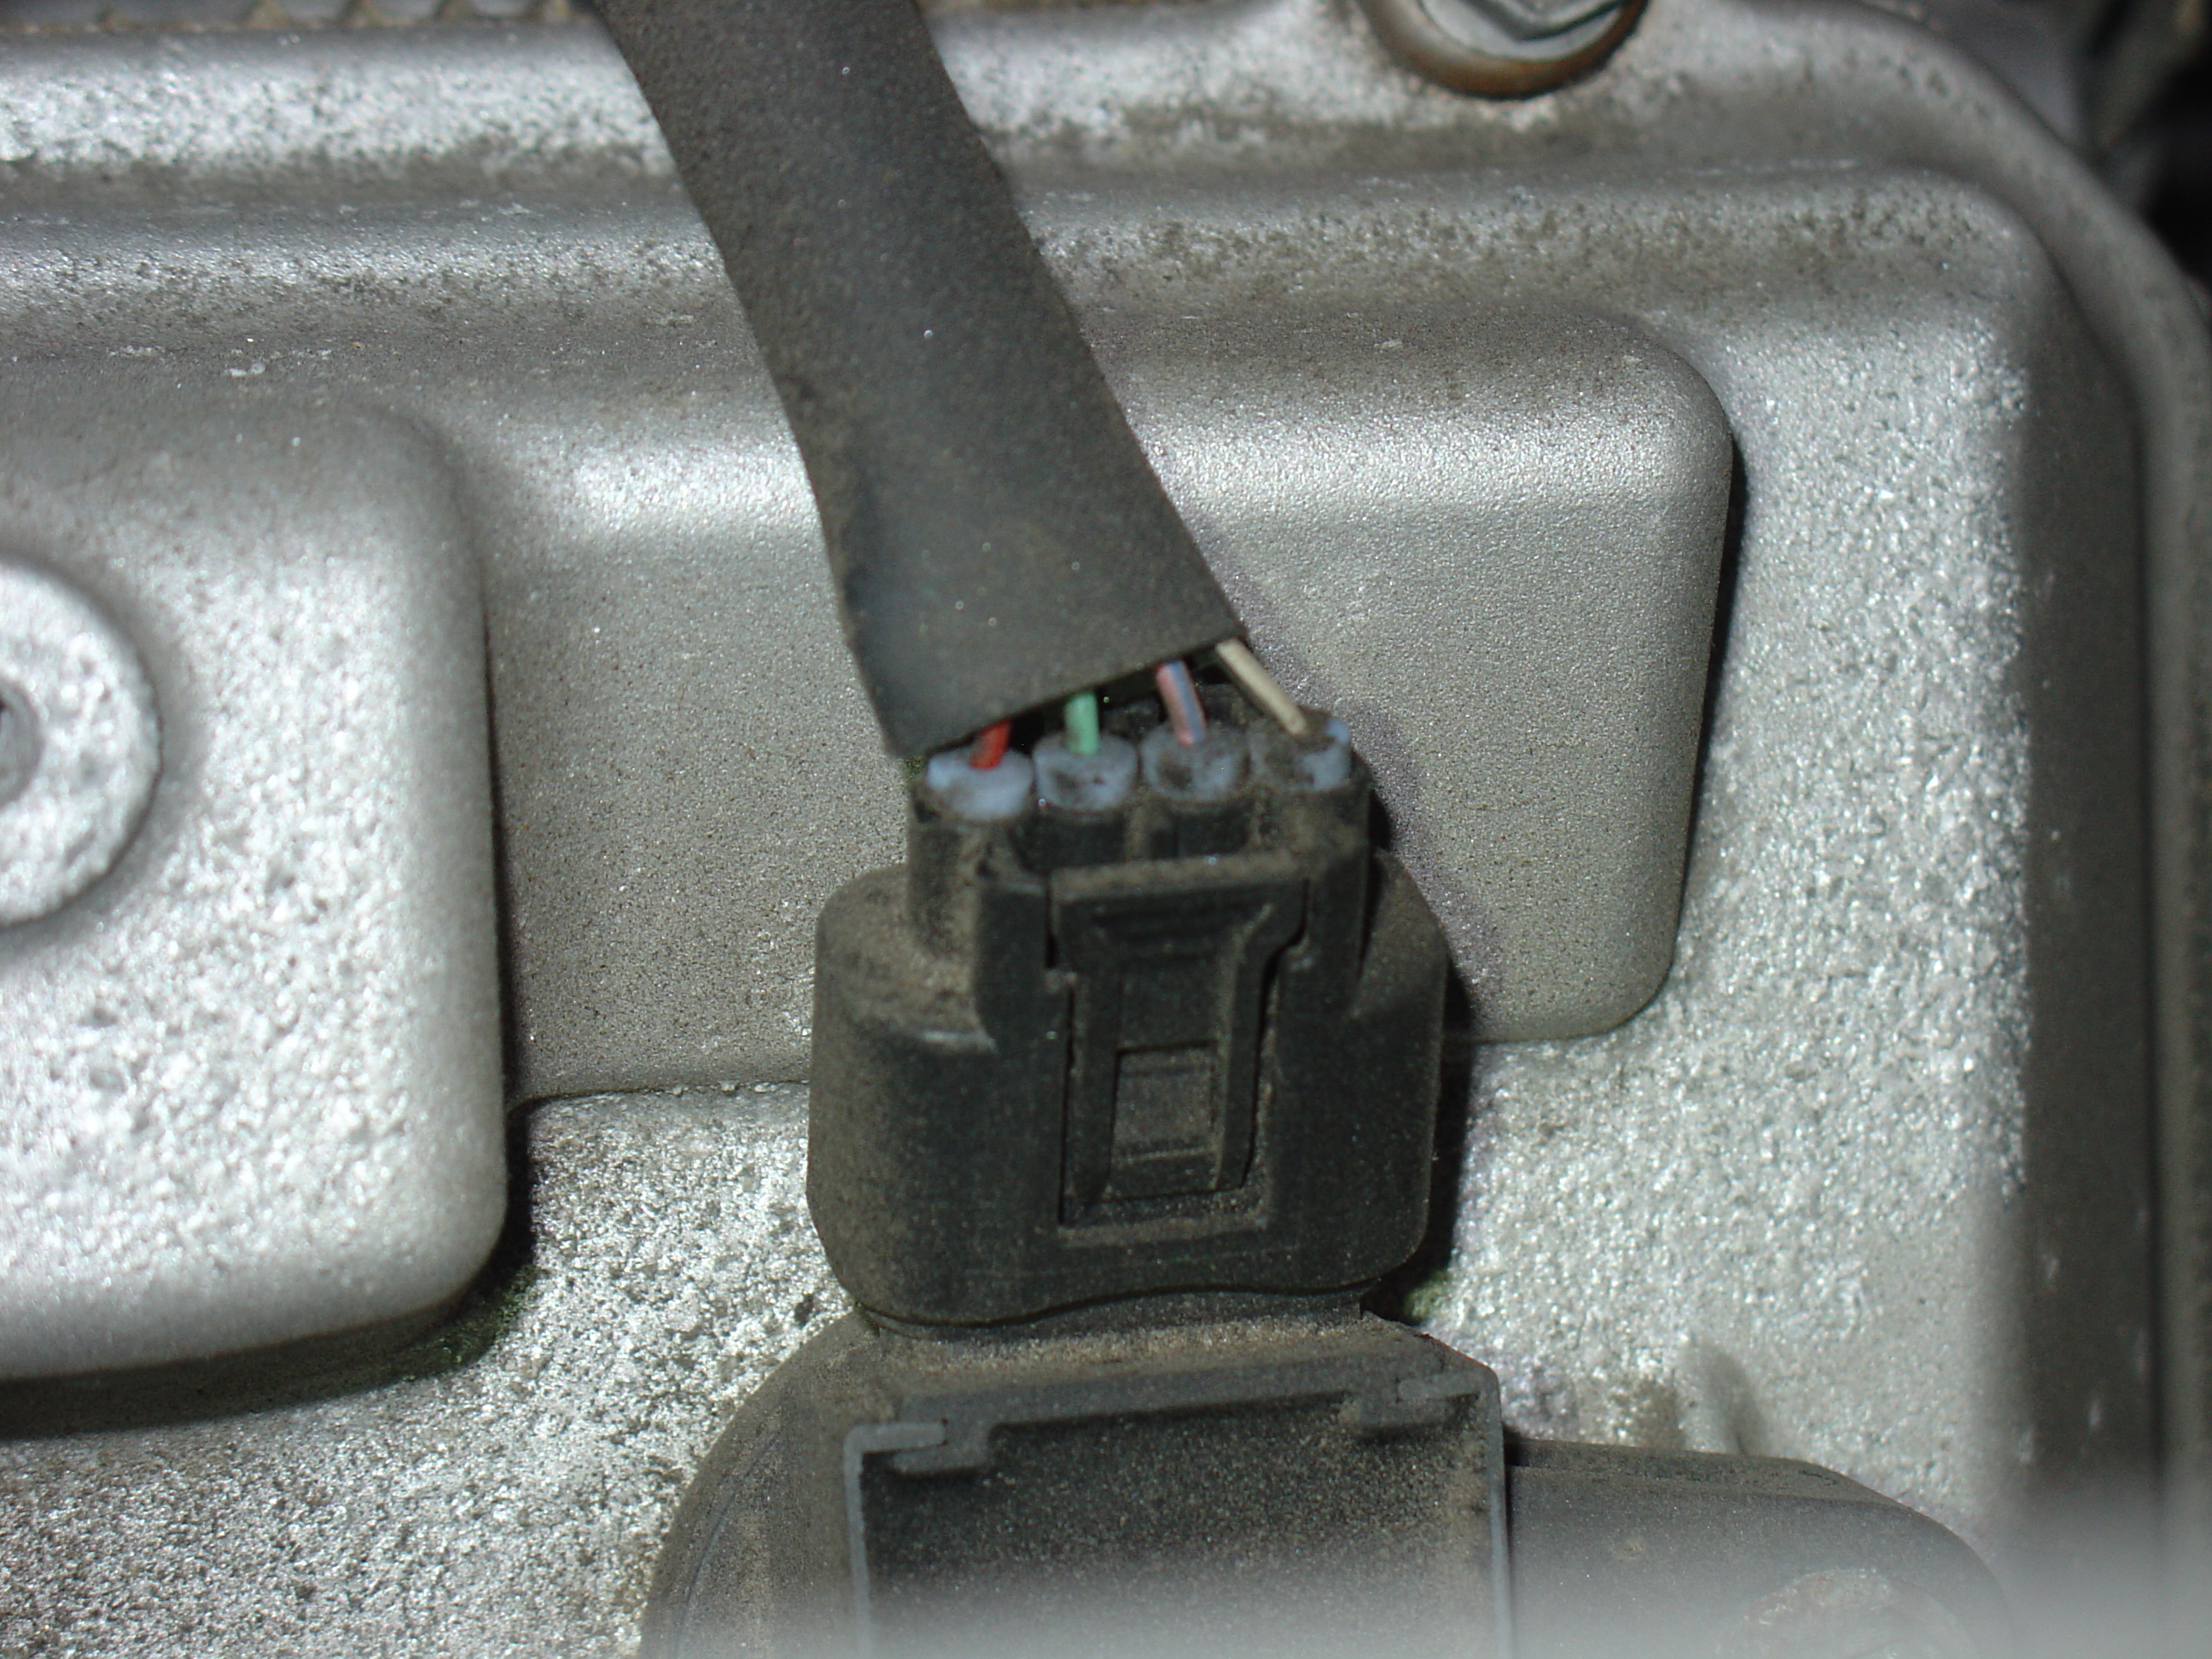 Wiring Diagram For 7 I7 Ignition Coil Connector On 2002 Ls 430 Clublexus Lexus Forum Discussion